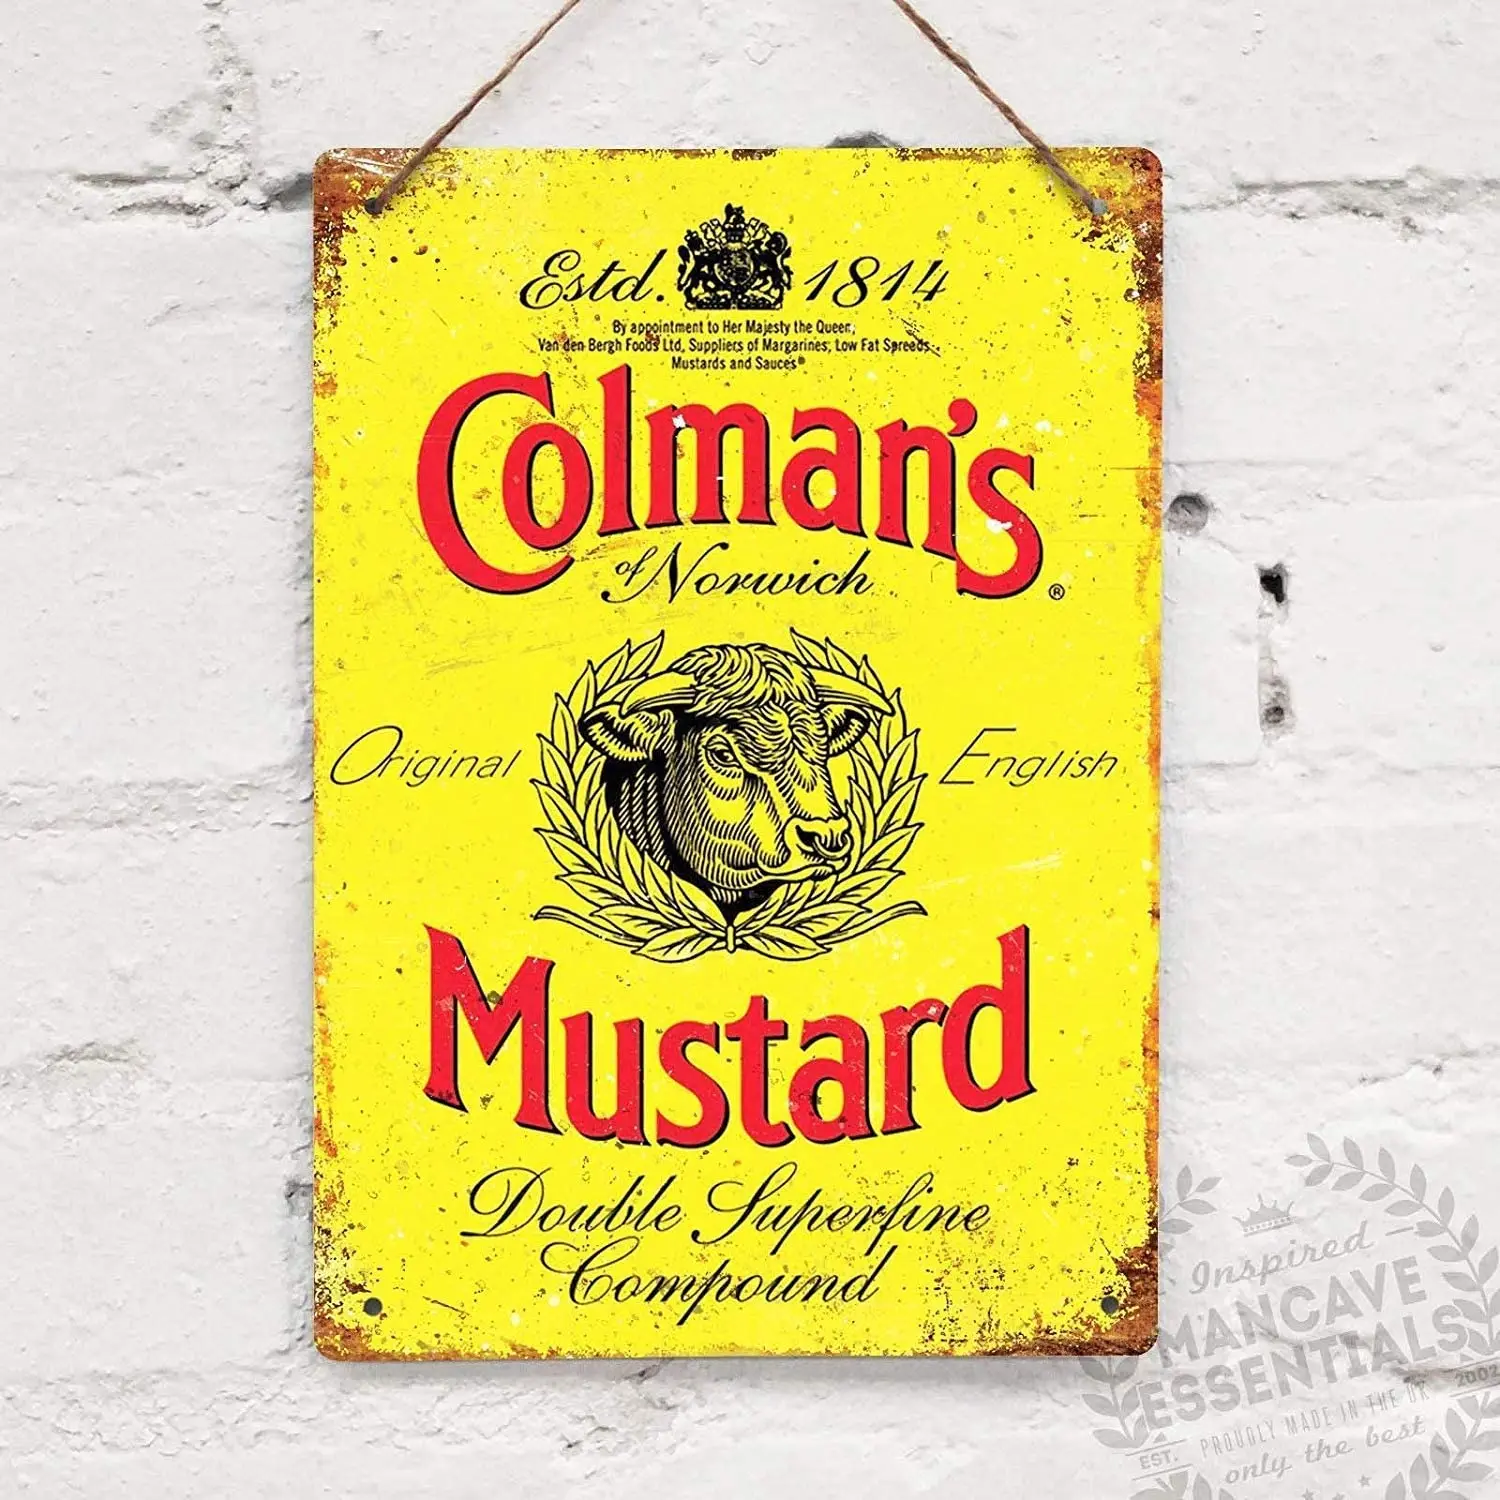 

Coleman'S Mustard Retro Metal Tin Sign Plaque Poster Wall Decor Art Shabby Chic Gift